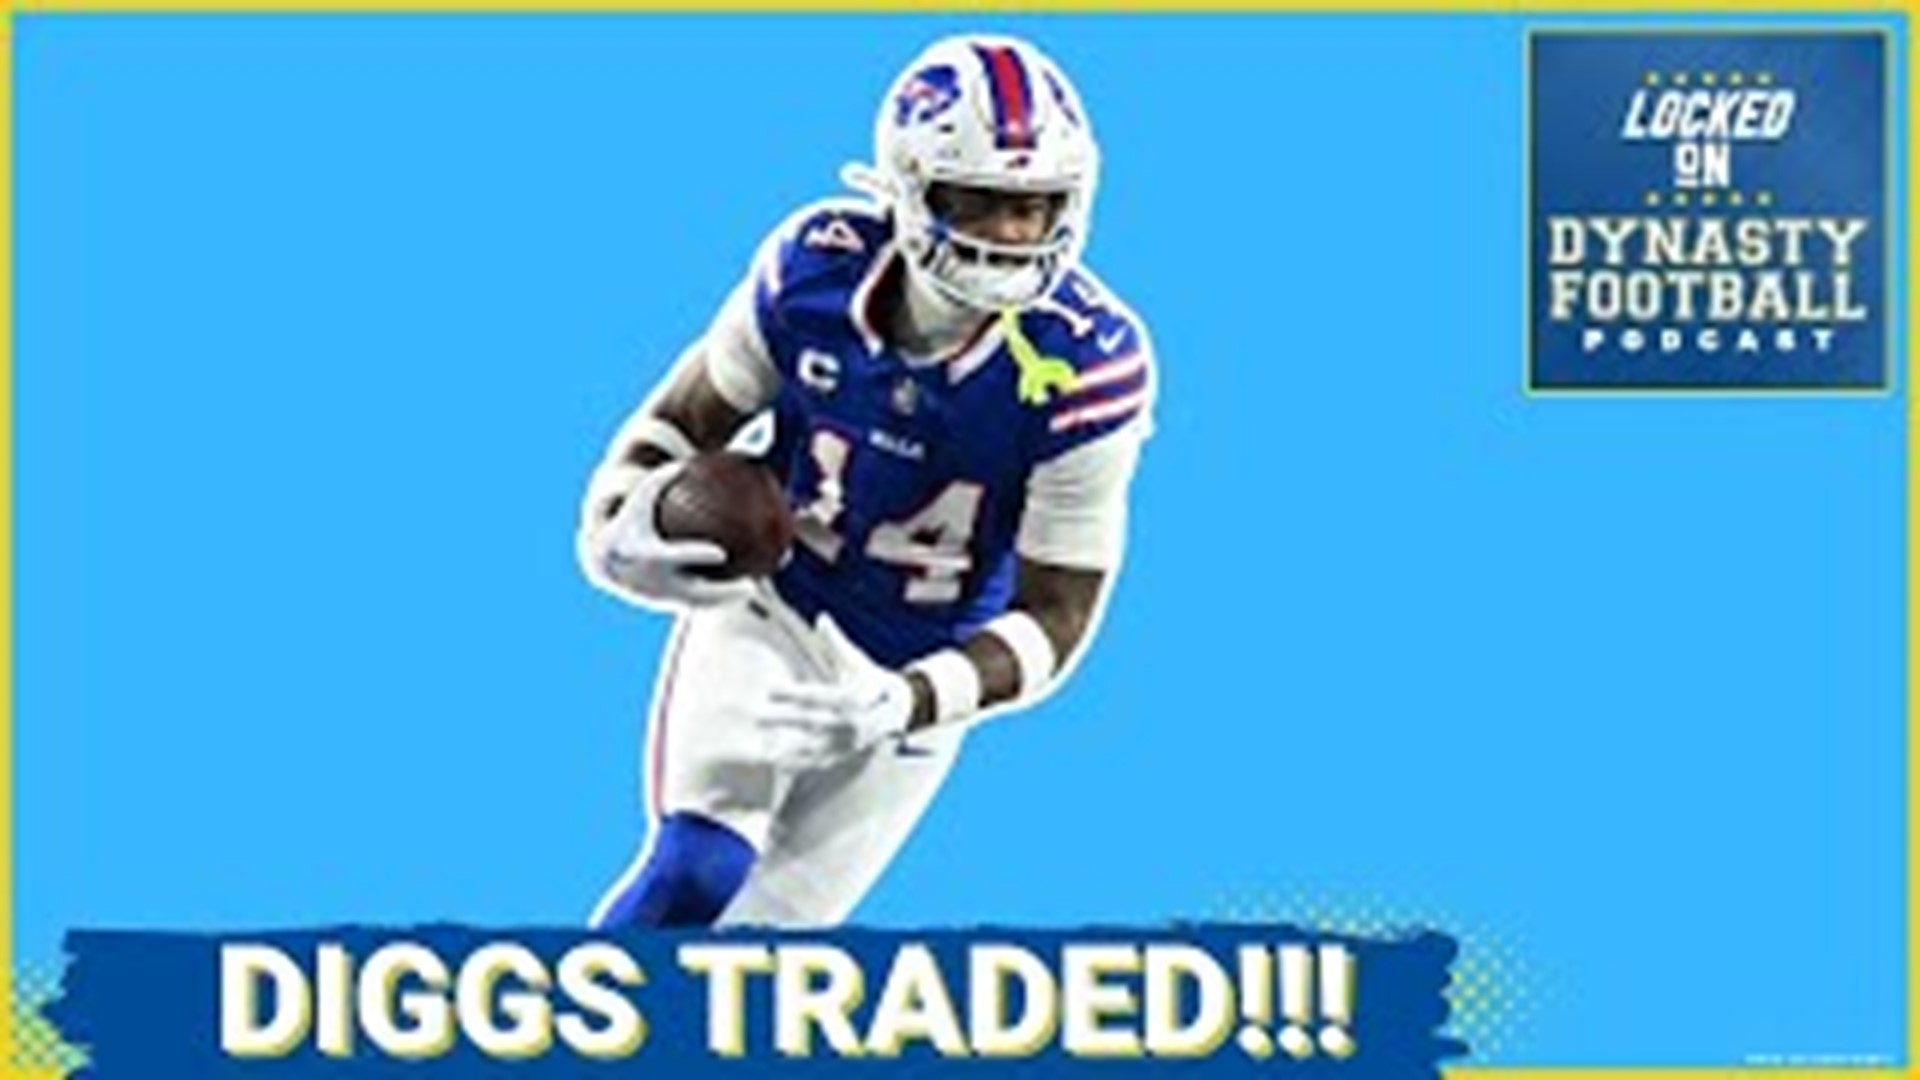 The Buffalo Bills have traded All-Pro WR Stefon Diggs to the Houston Texans for a 2025 second-round pick. How does this impact the dynasty value of Diggs?